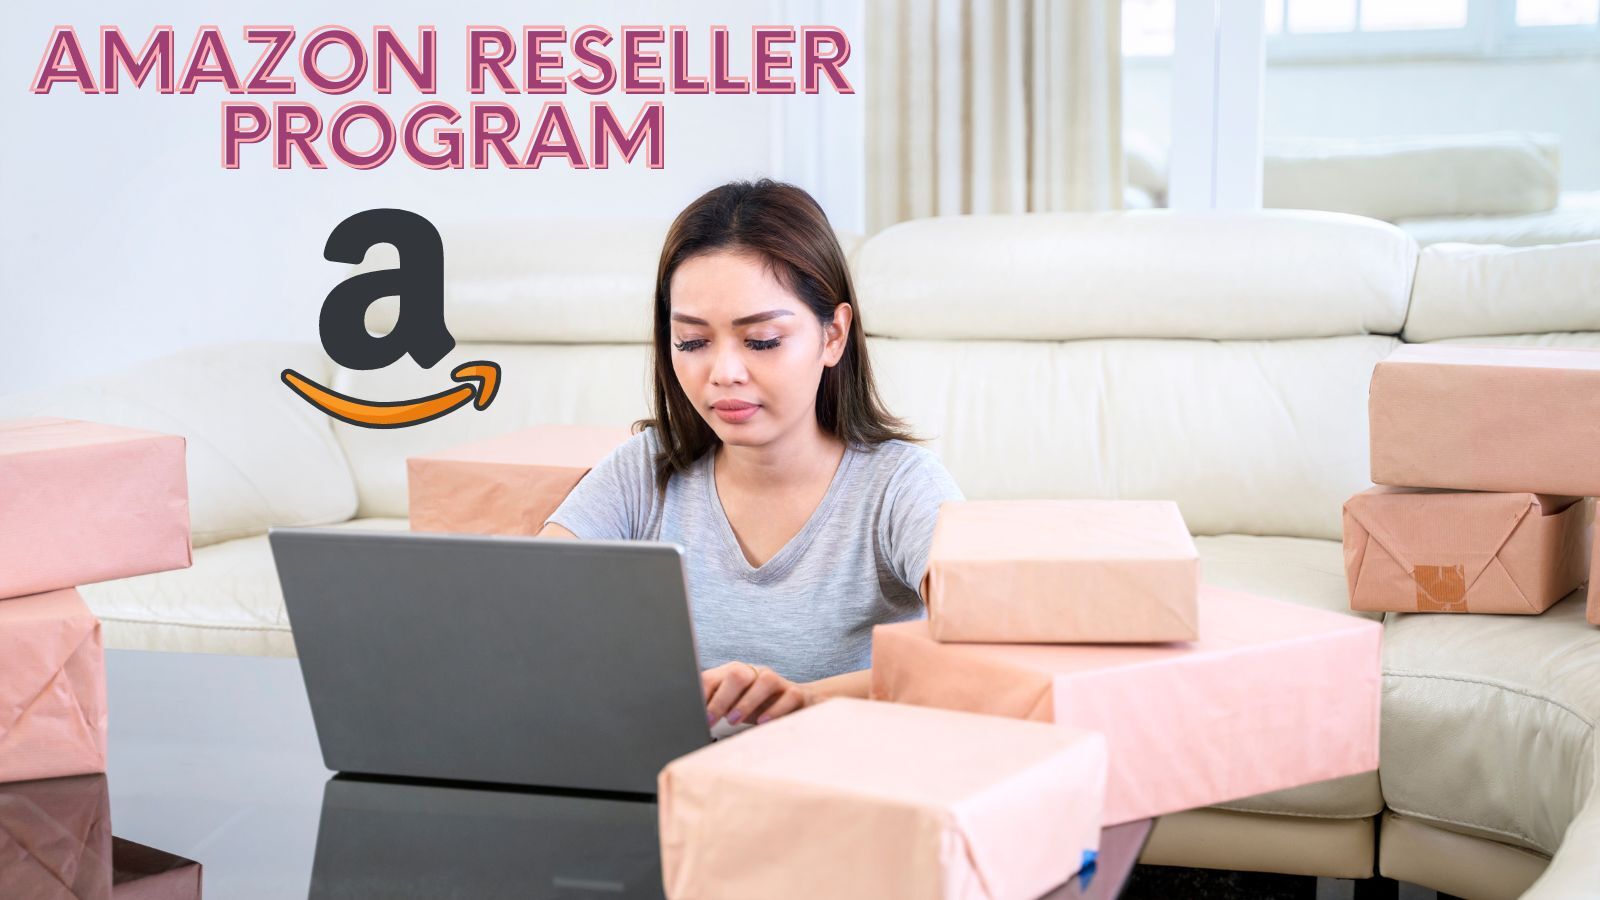 Amazon Reseller Program: All You Need to Know!